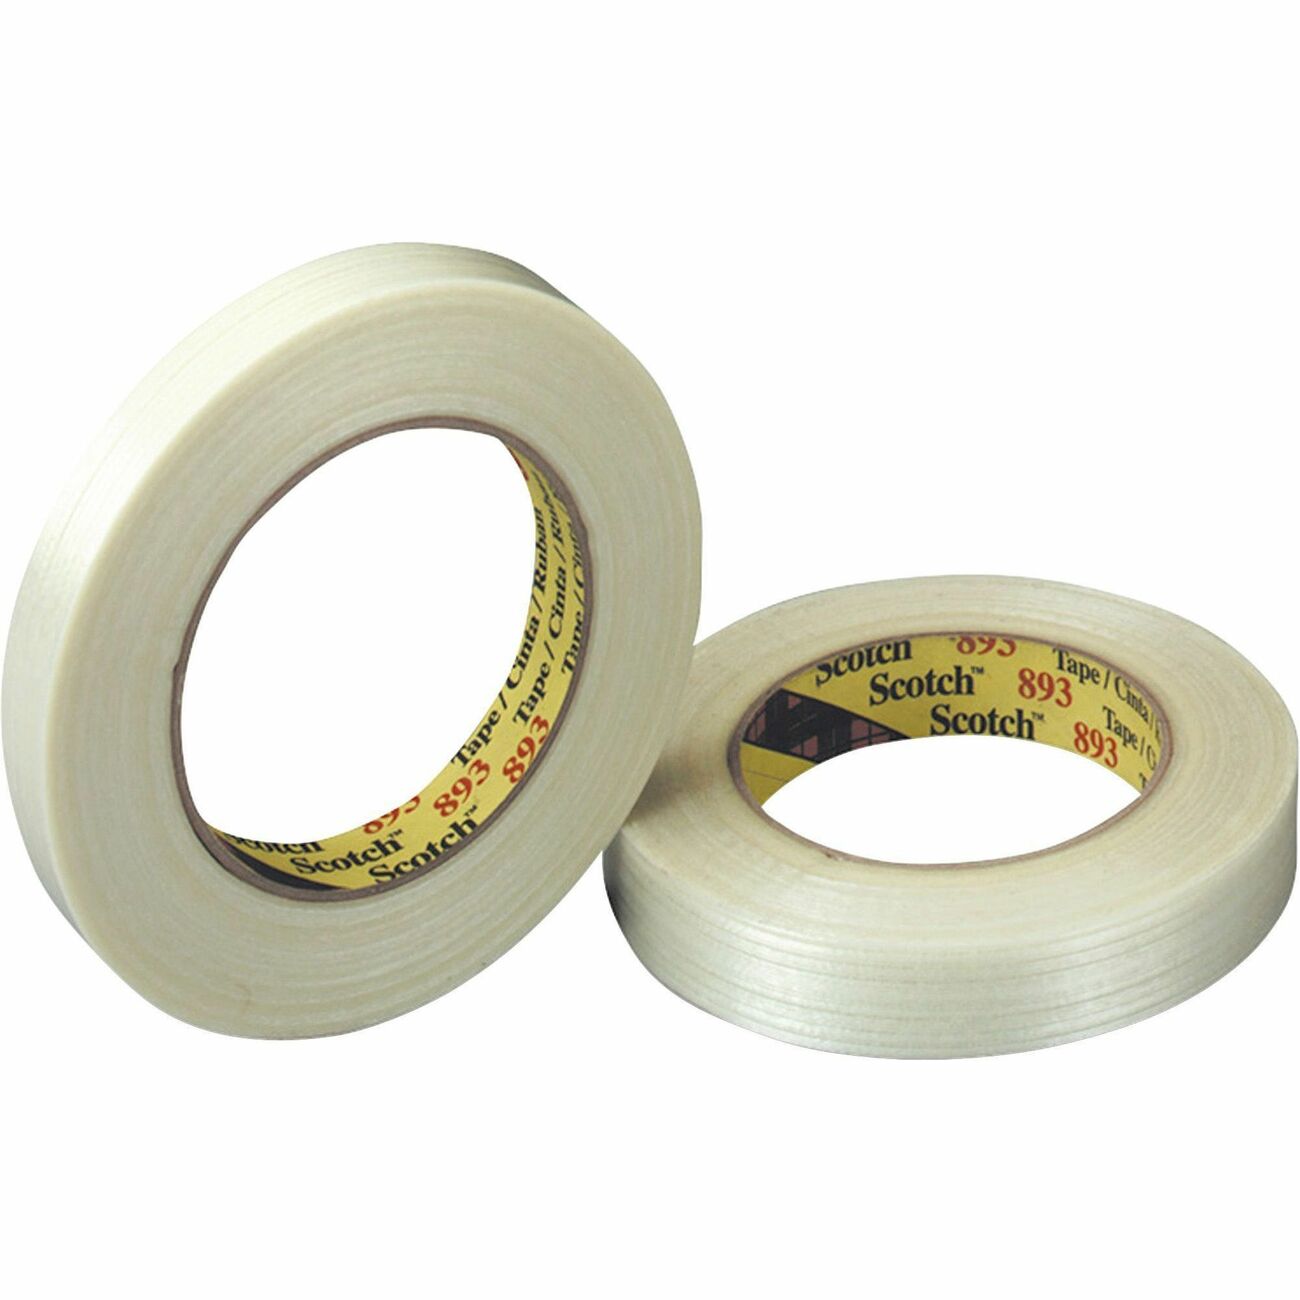 Filament tape VS Duct tape: which one is the right one